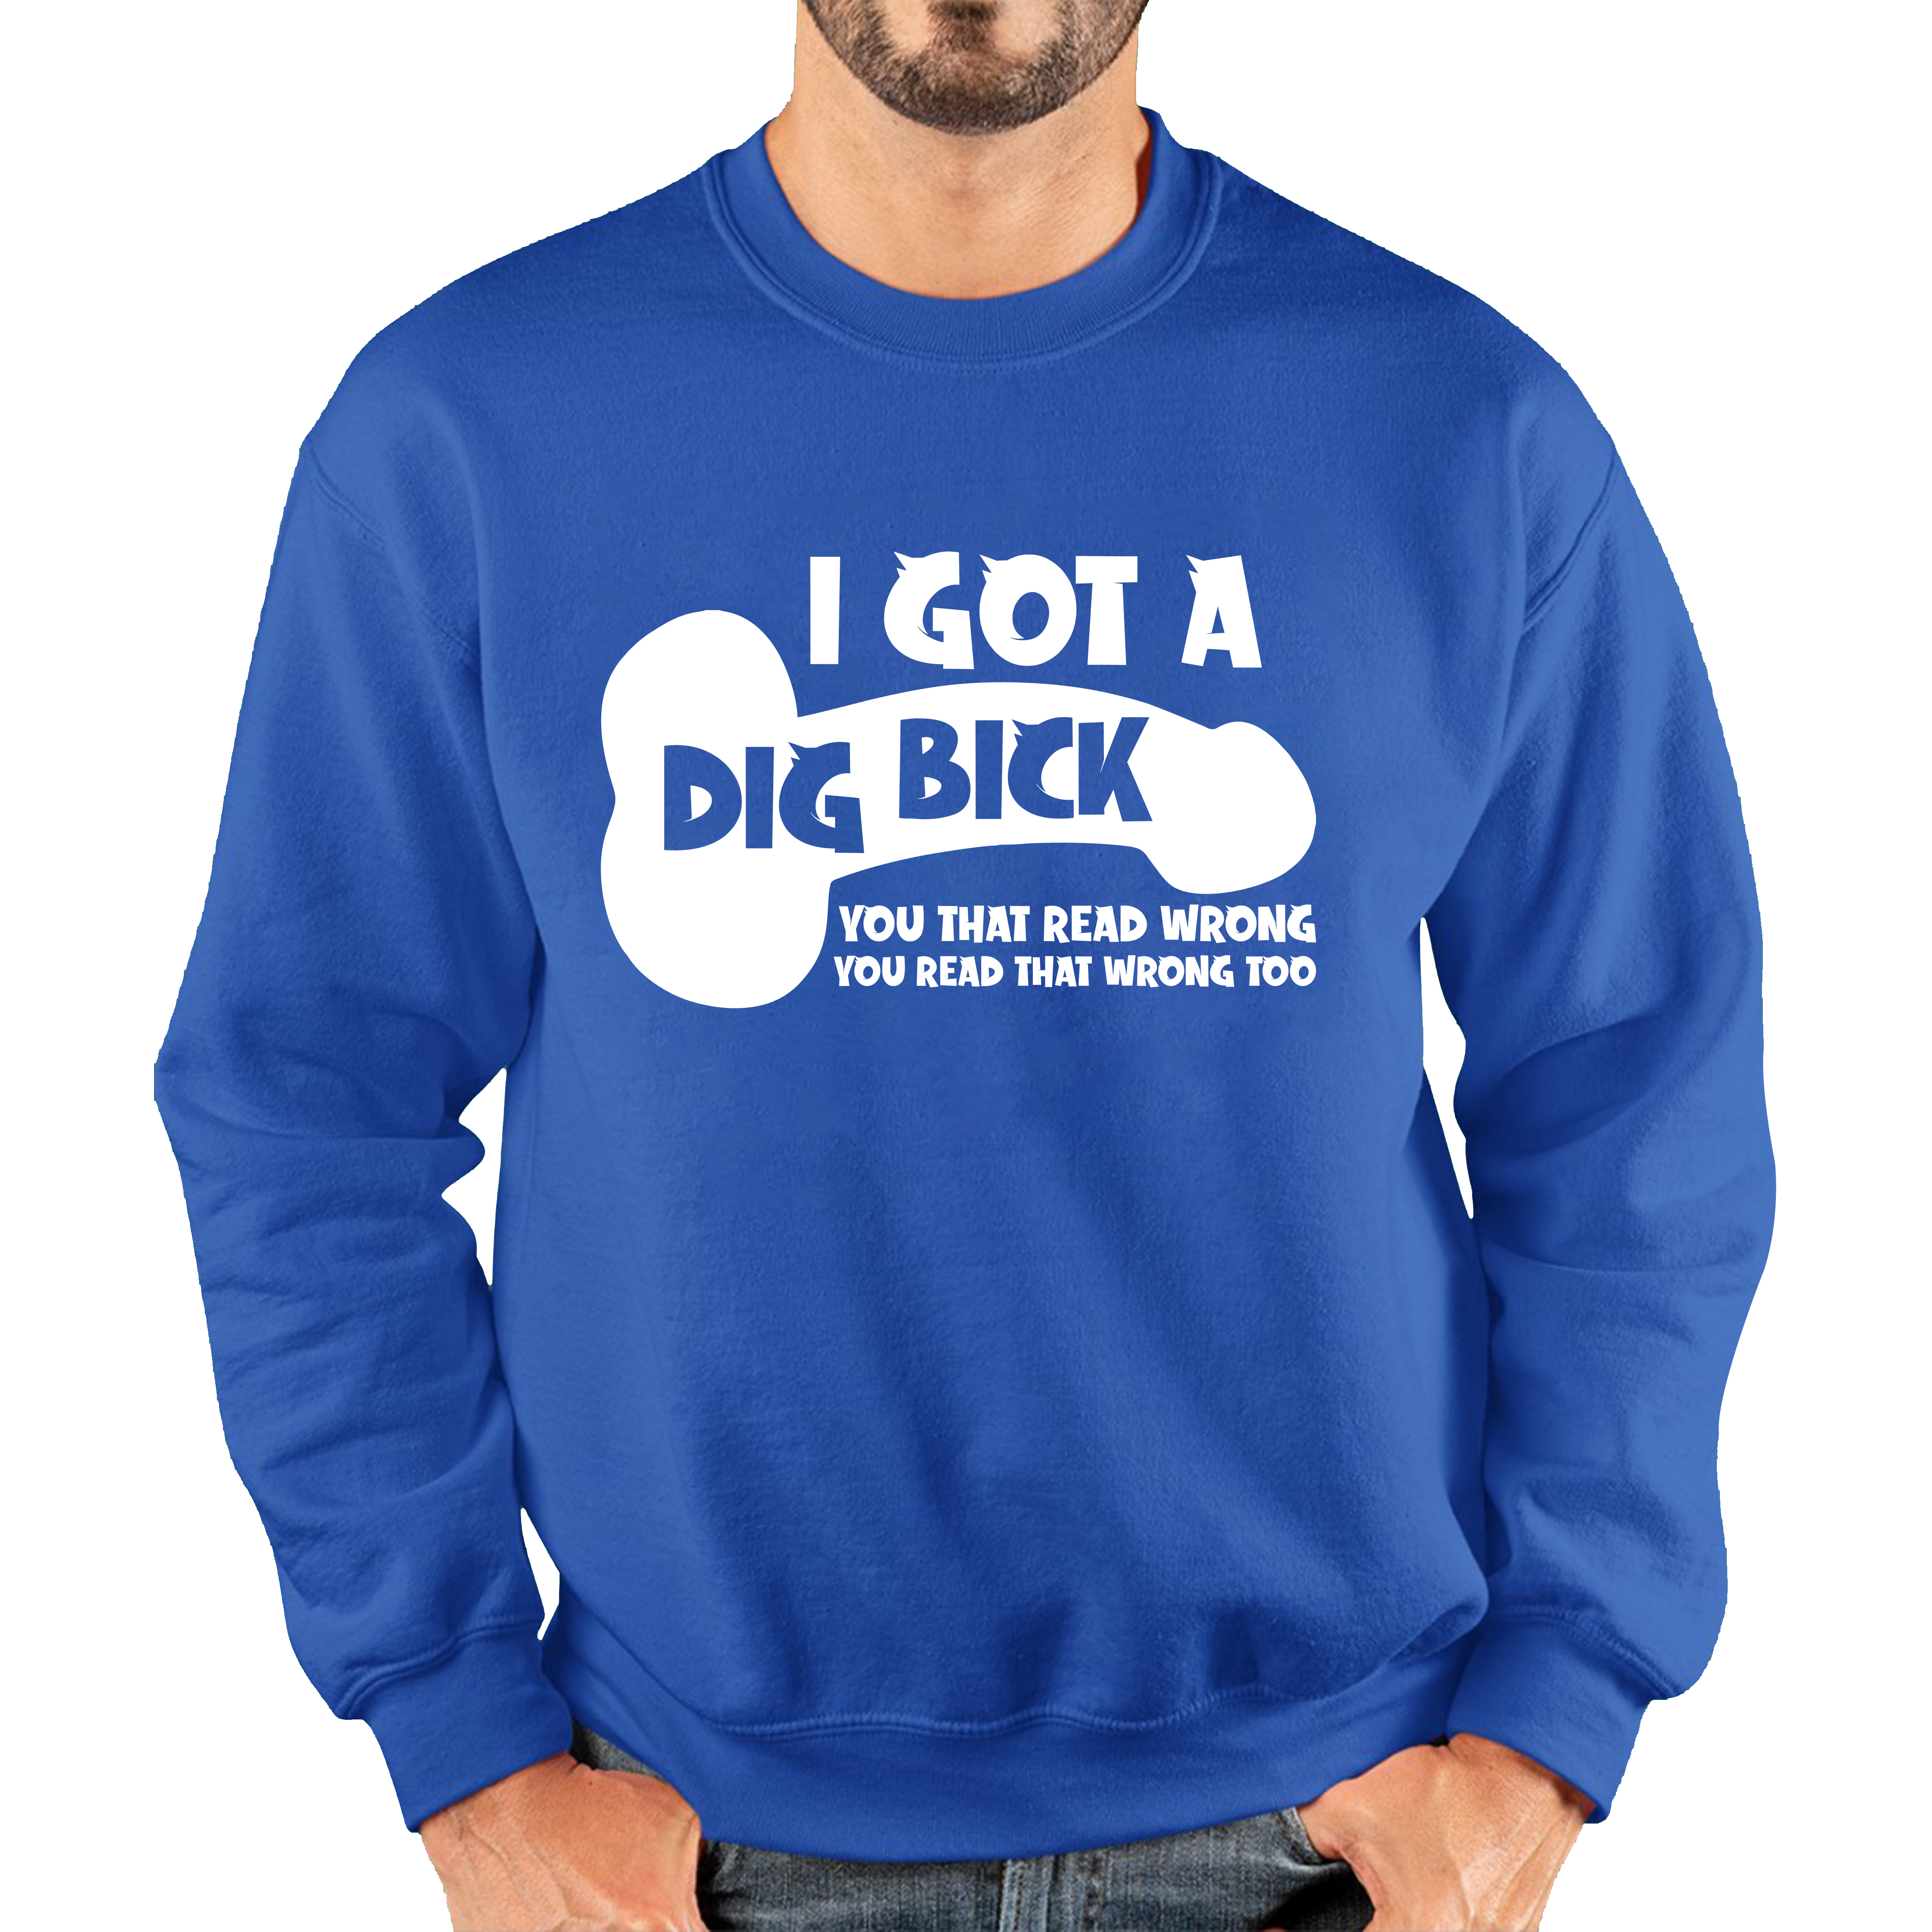 I Got A Dig Bick You That Read Wrong You Read That Wrong Too Funny Novelty Sarcastic Humour Unisex Sweatshirt